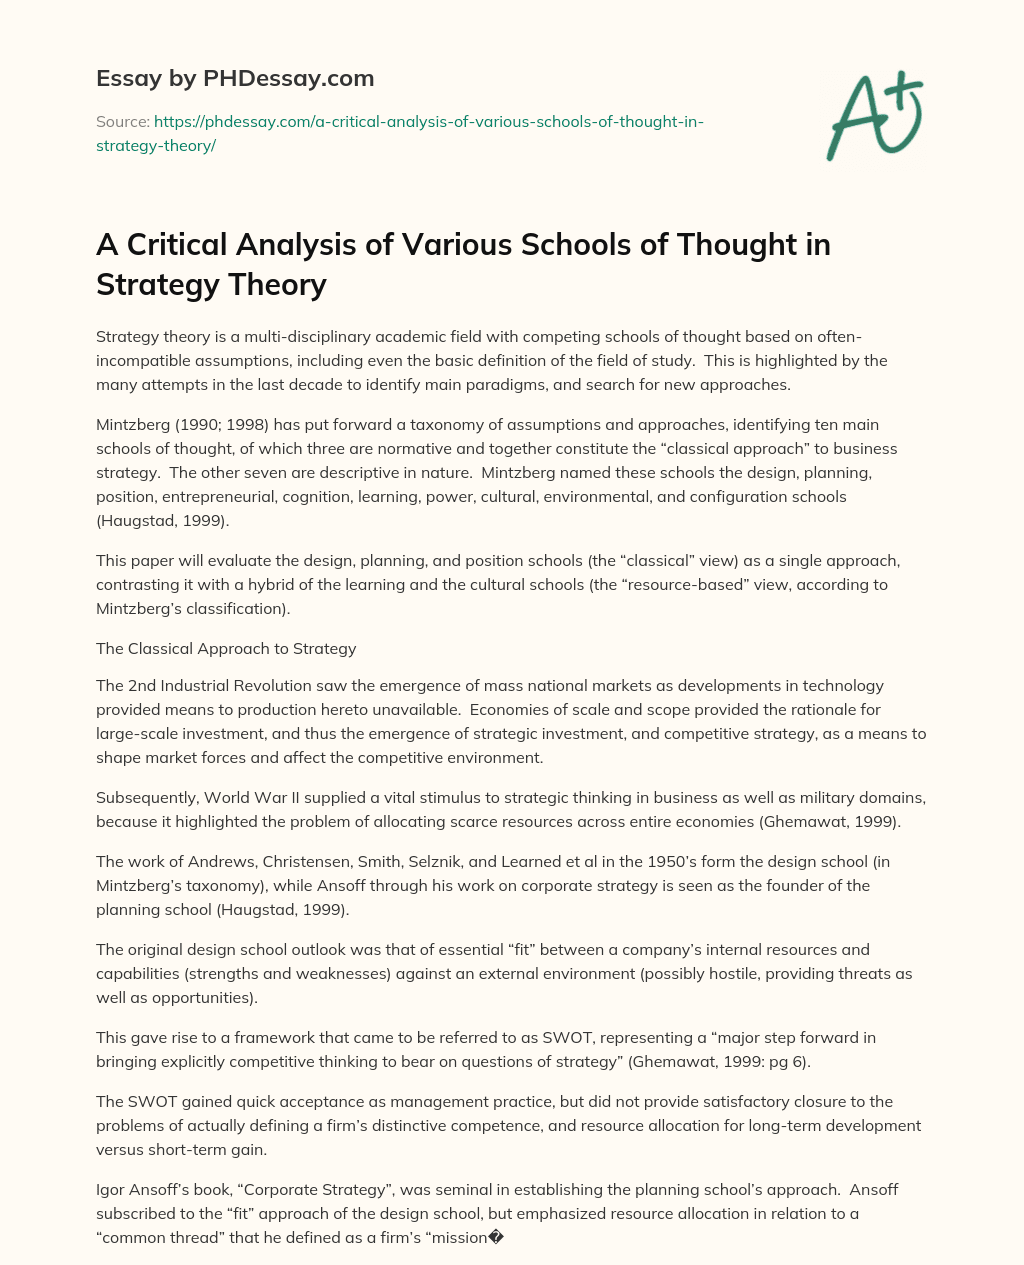 A Critical Analysis of Various Schools of Thought in Strategy Theory essay